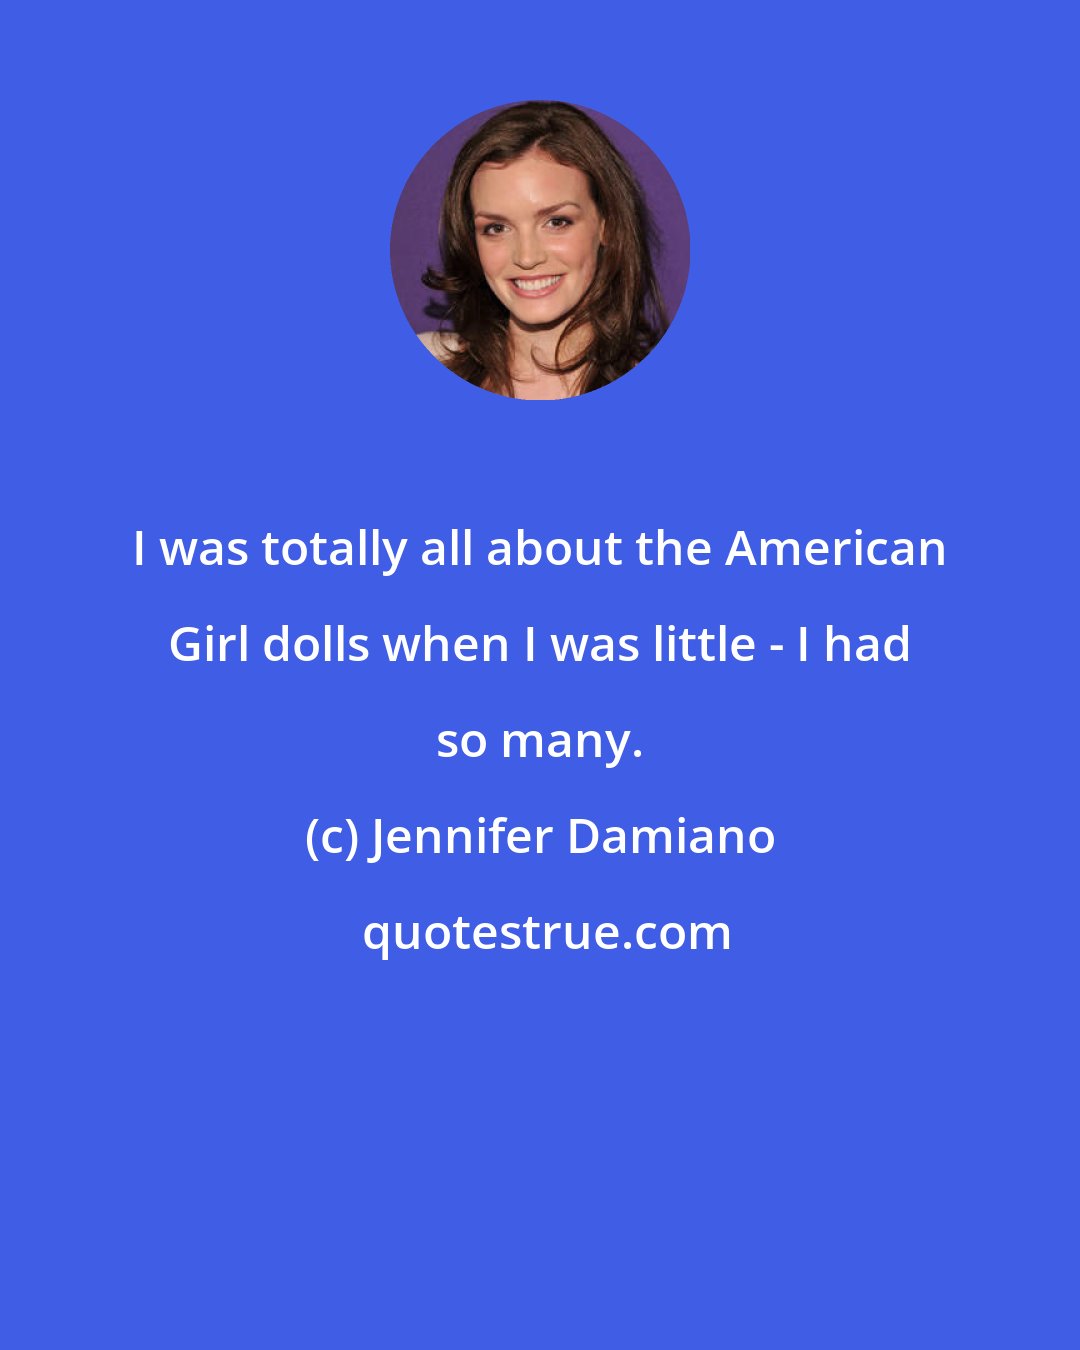 Jennifer Damiano: I was totally all about the American Girl dolls when I was little - I had so many.